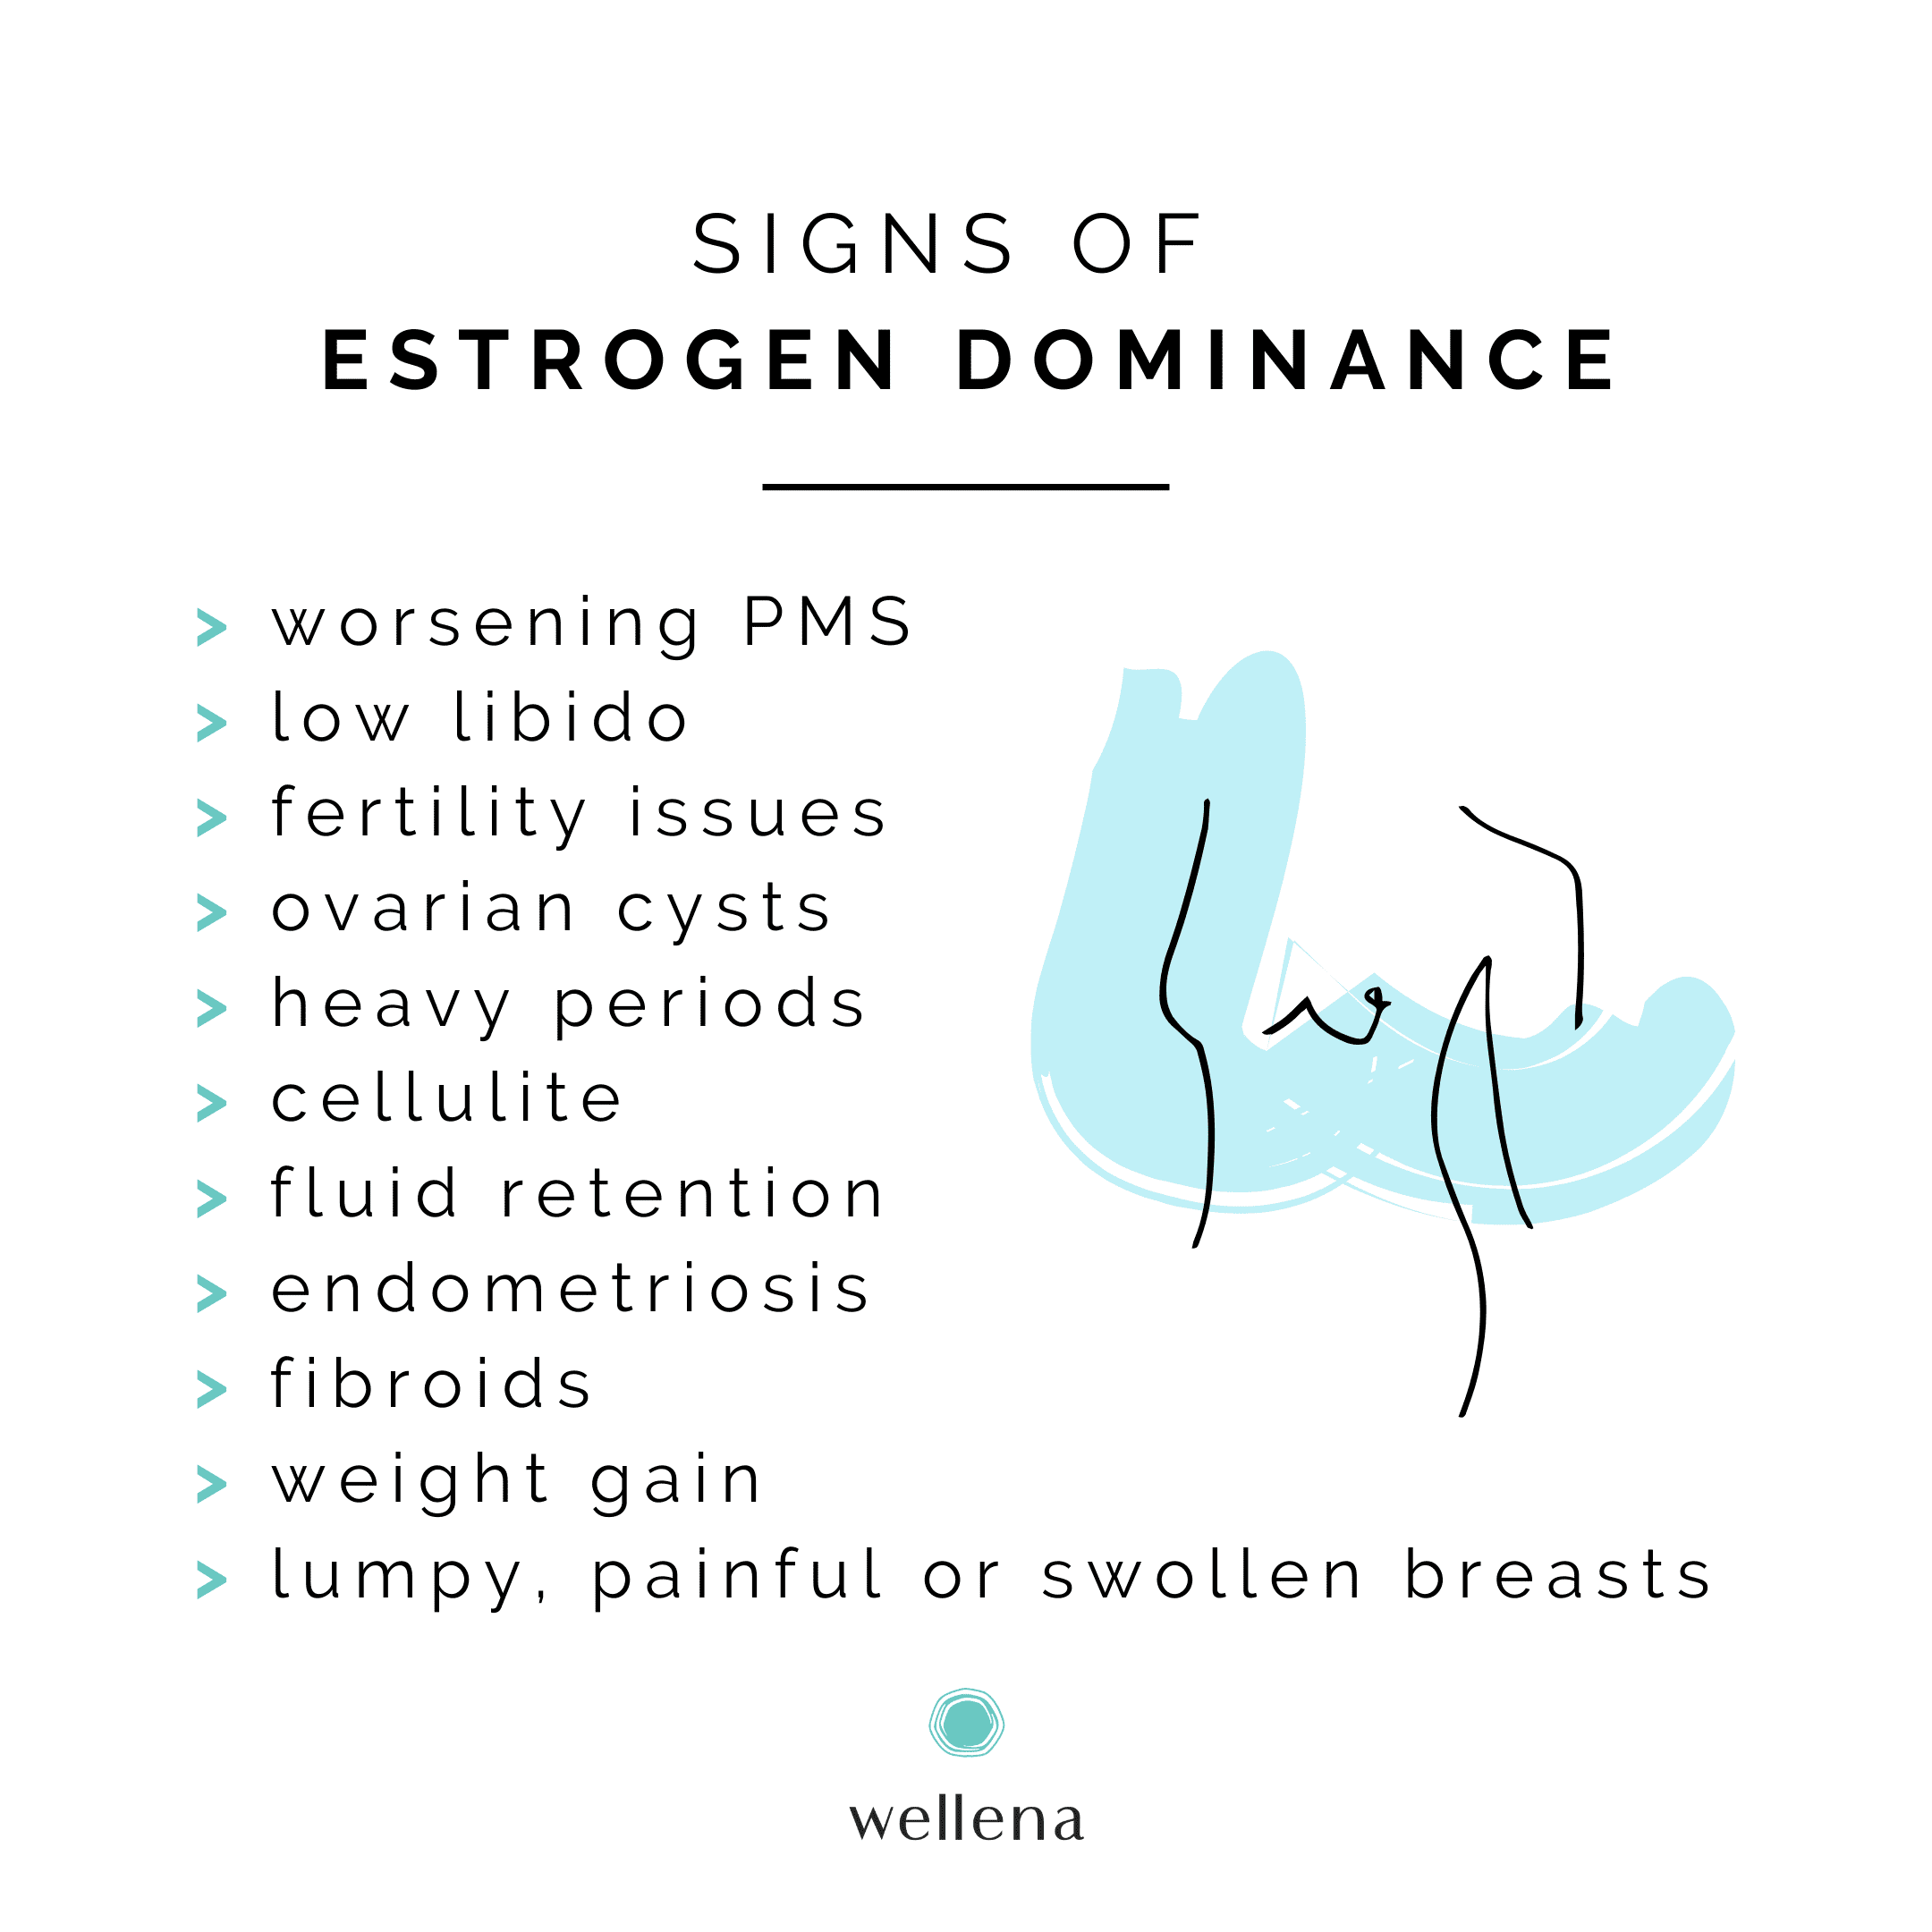 ED can mean one of two things: you either have too much estradiol in relation to progesterone, or an imbalance in your estrogen metabolites (some are protective and some are dangerous). Here are signs to look out for.